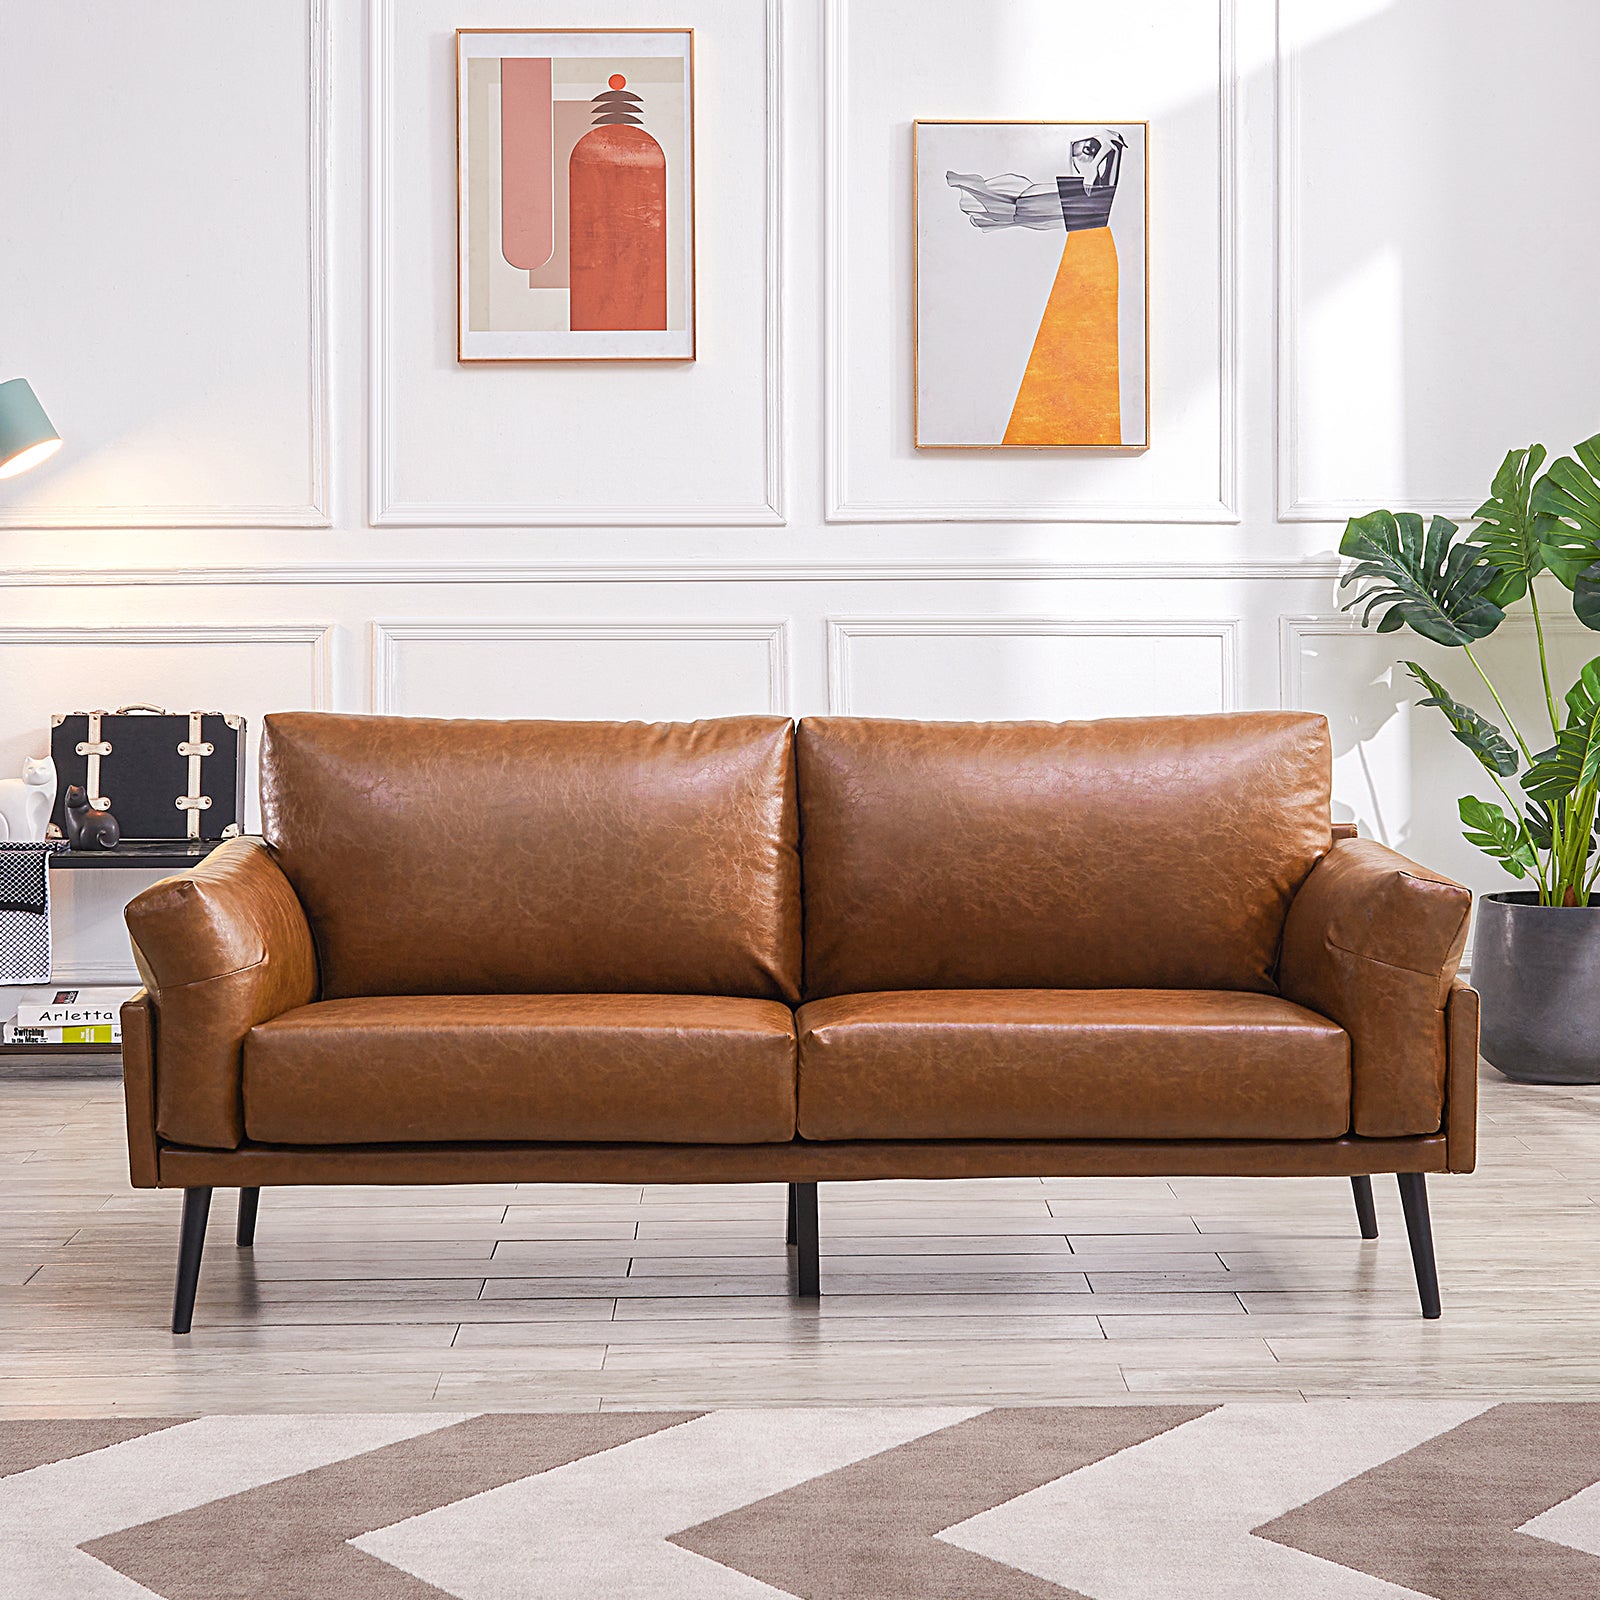 Flora Faux Leather Loveseat 3-Seater Modern Sofa Couch Caramel Color